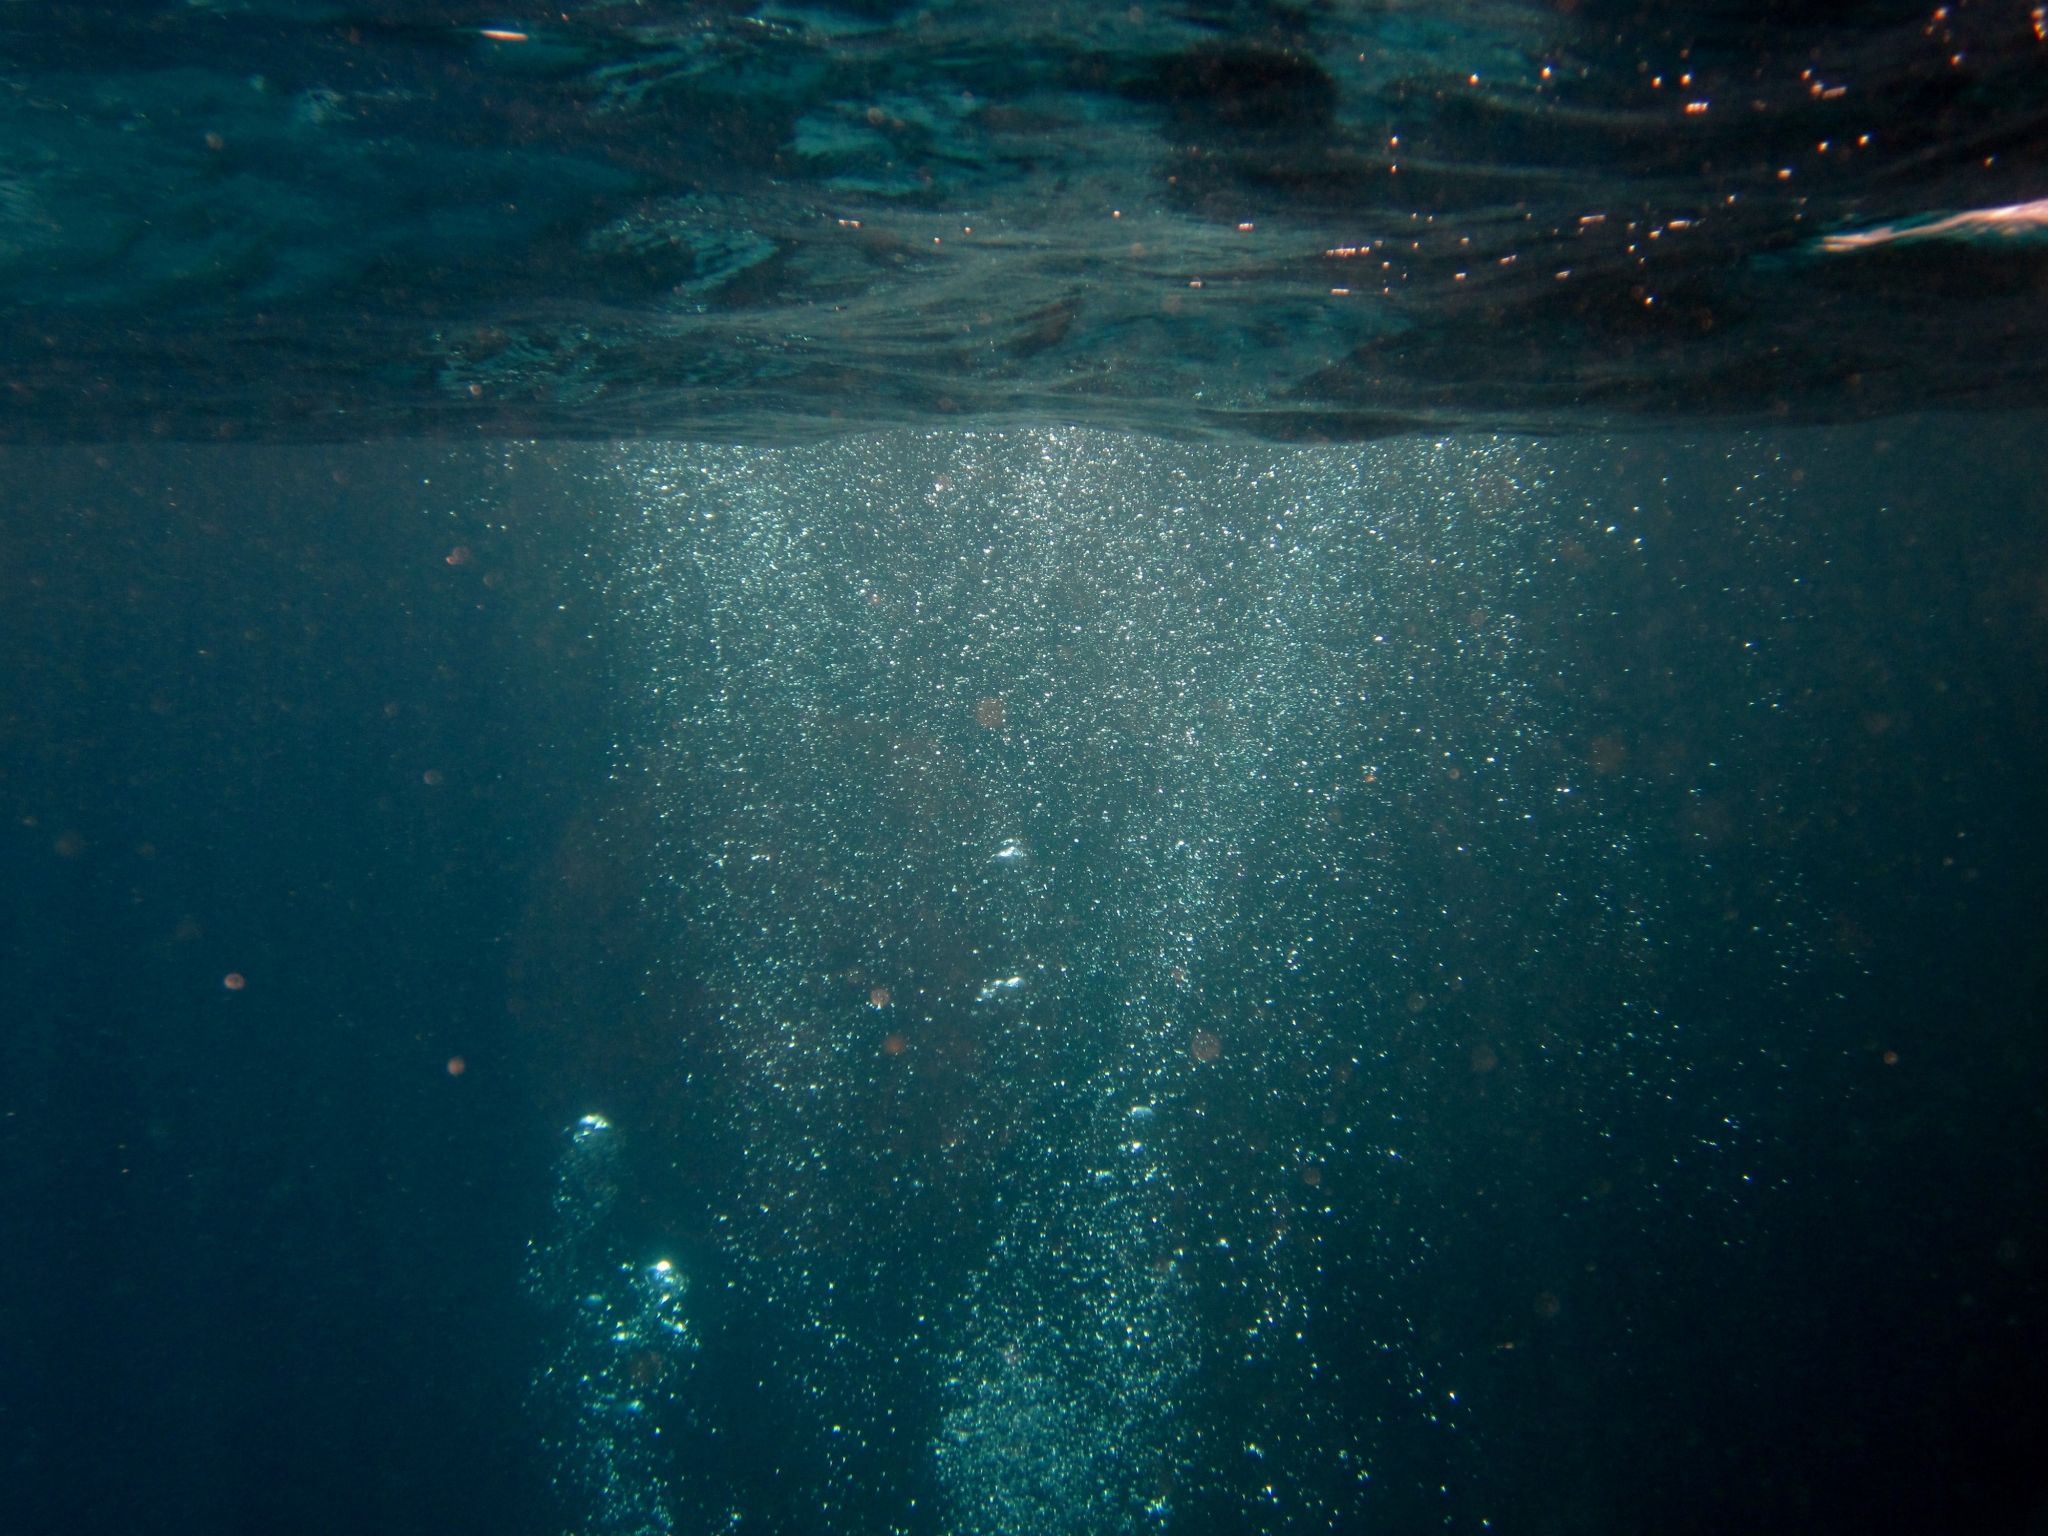 A person is swimming in the ocean - Underwater